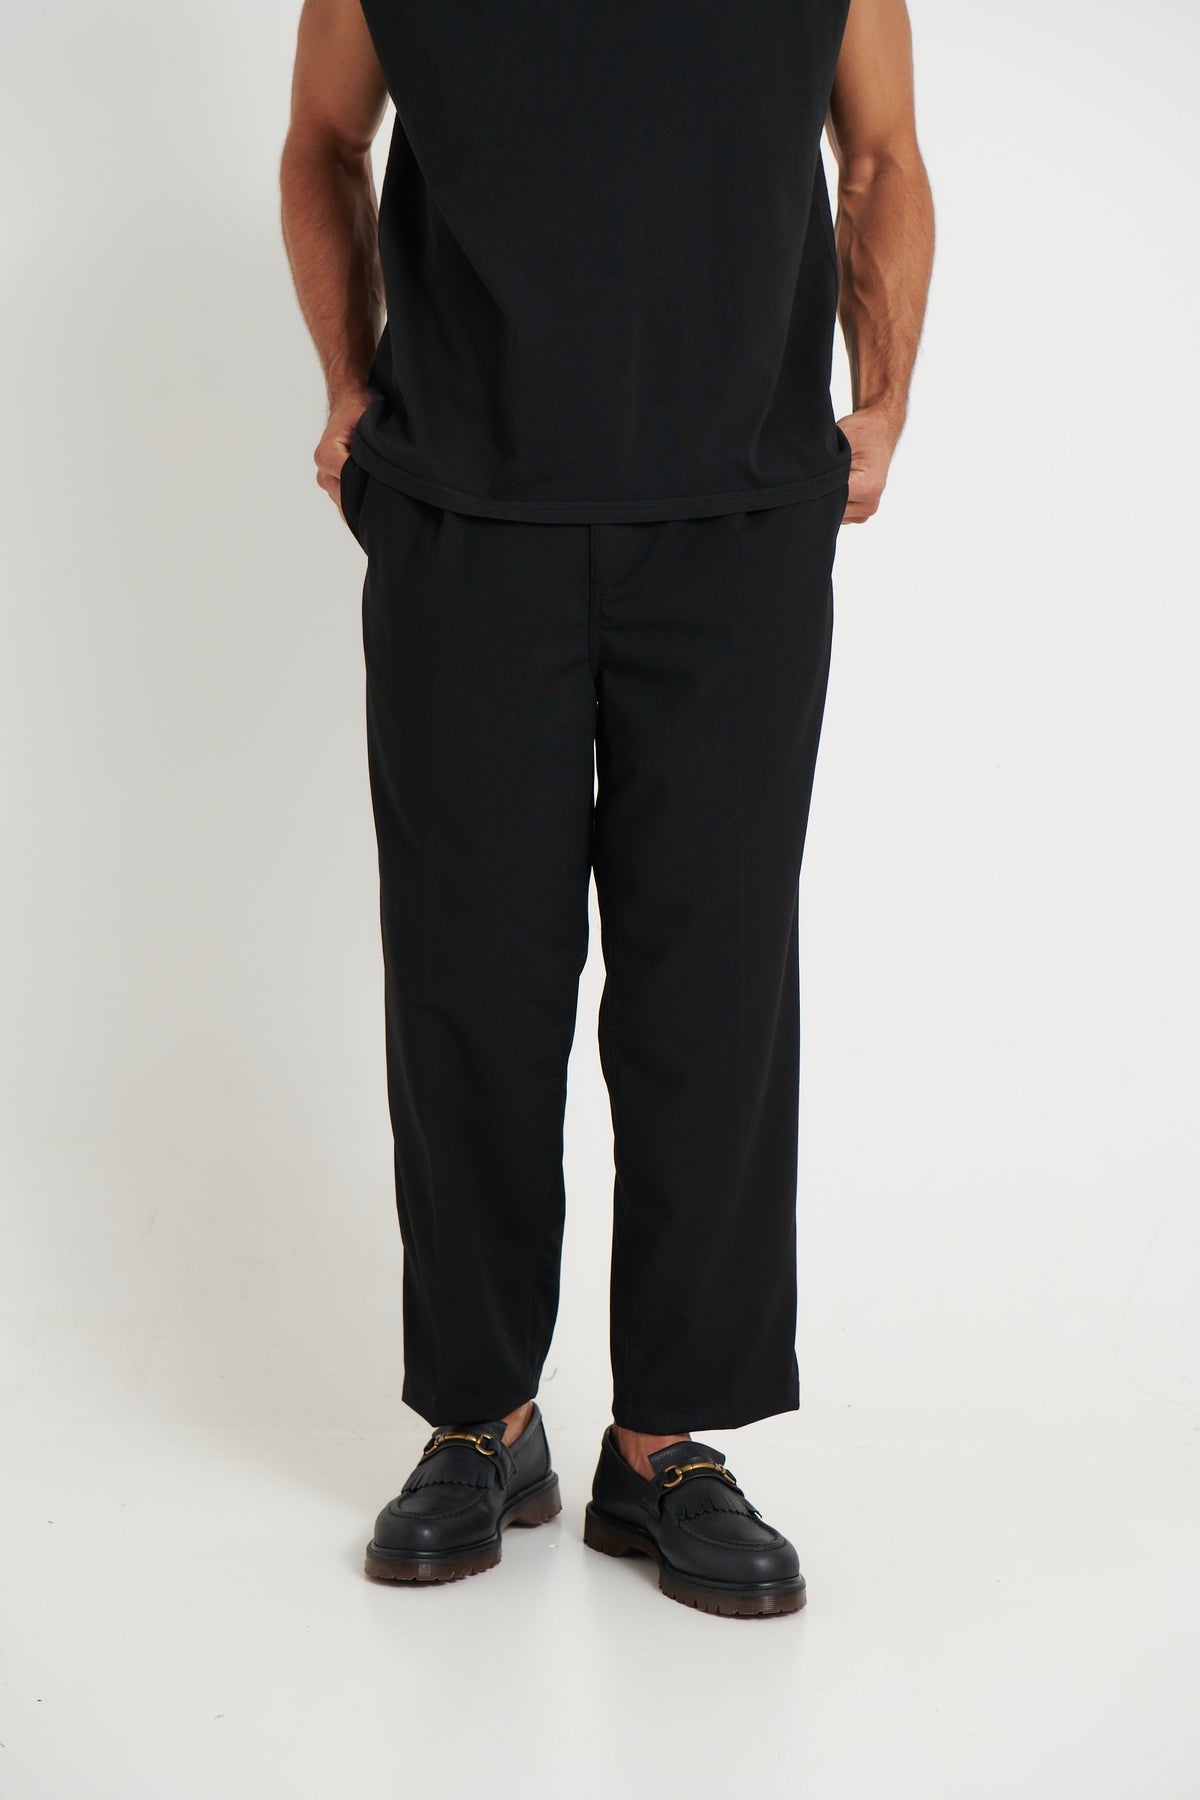 NTH Loose Fit Trouser Black